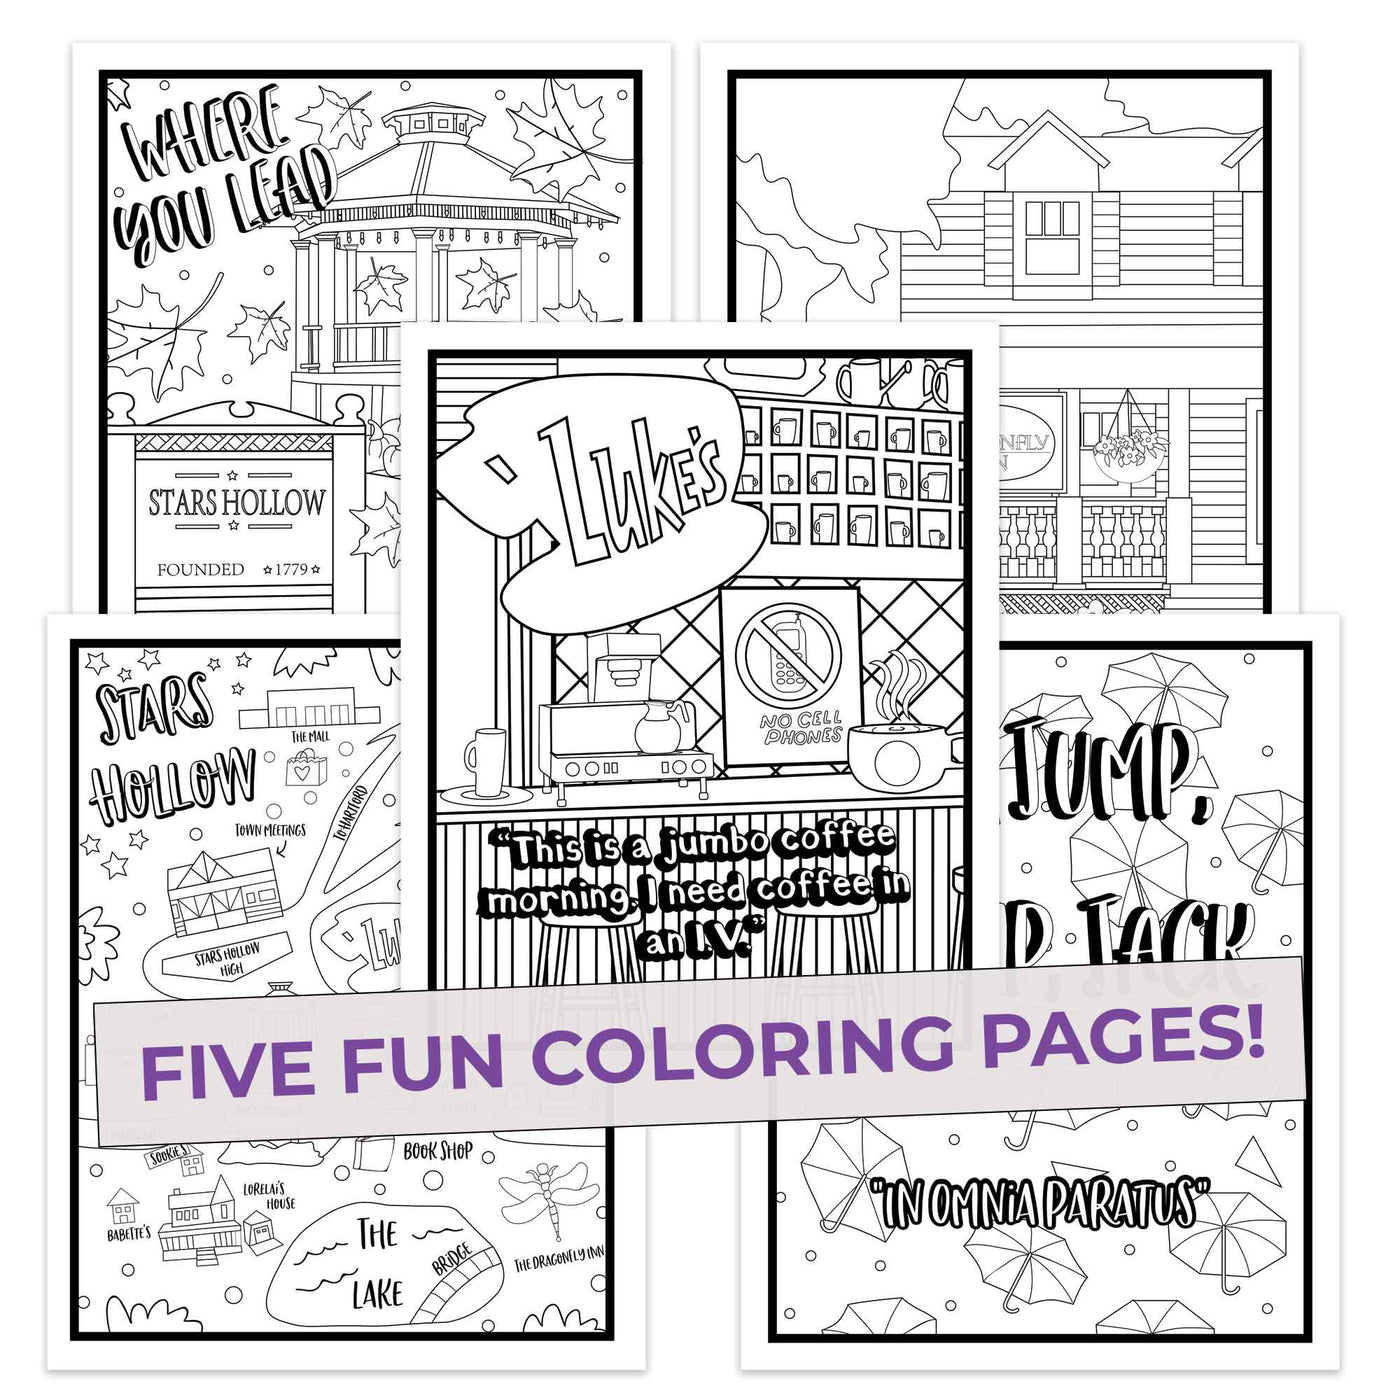 Five Gilmore Girls Coloring pages, Luke's Diner, five fun pages